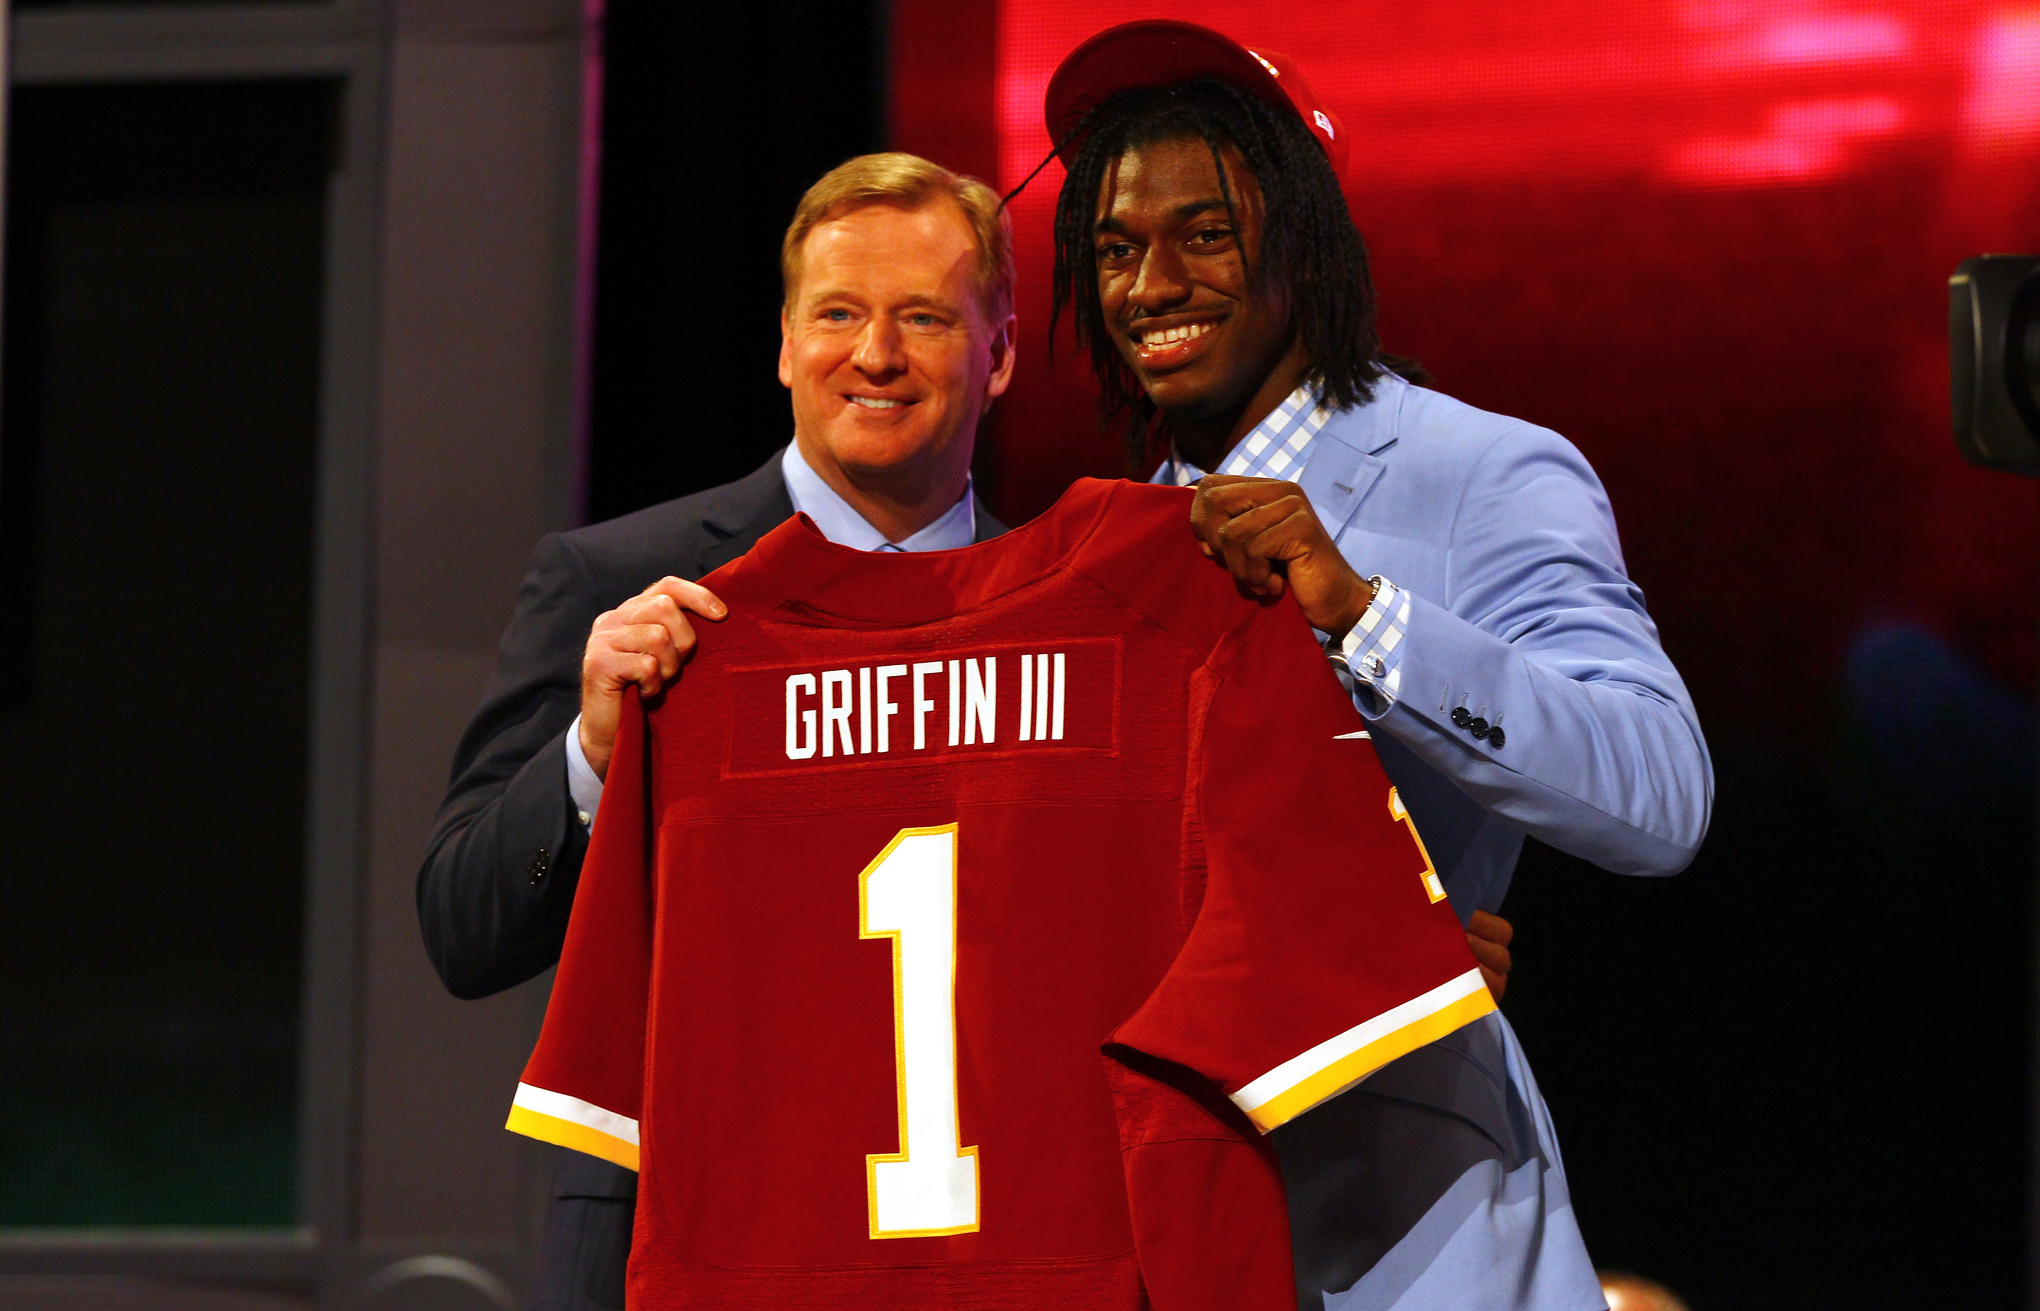 Data shows that trading up to take Robert Griffin III was a terrible idea.